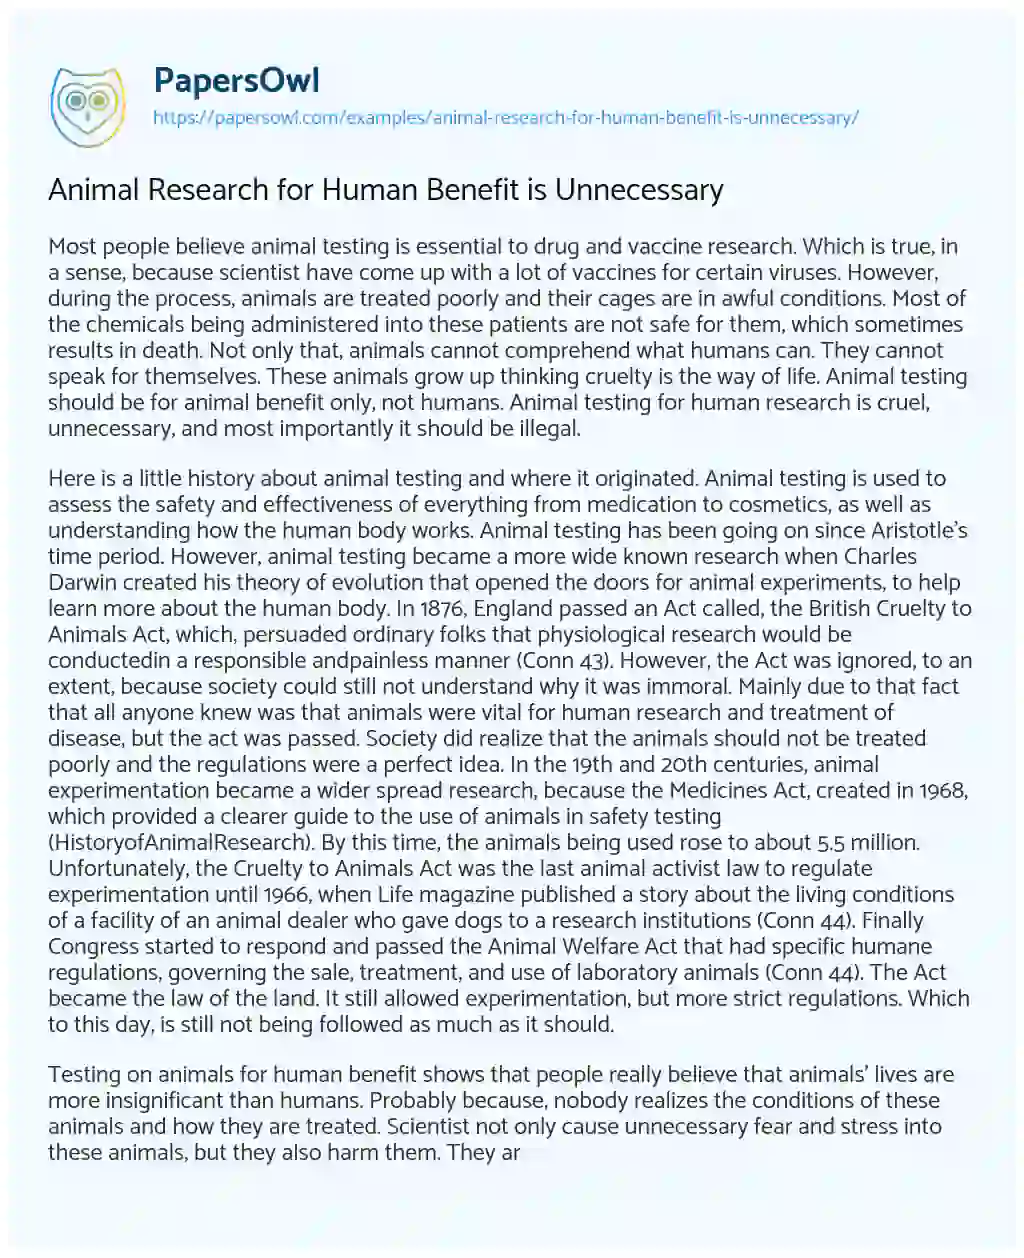 Essay on Animal Research for Human Benefit is Unnecessary